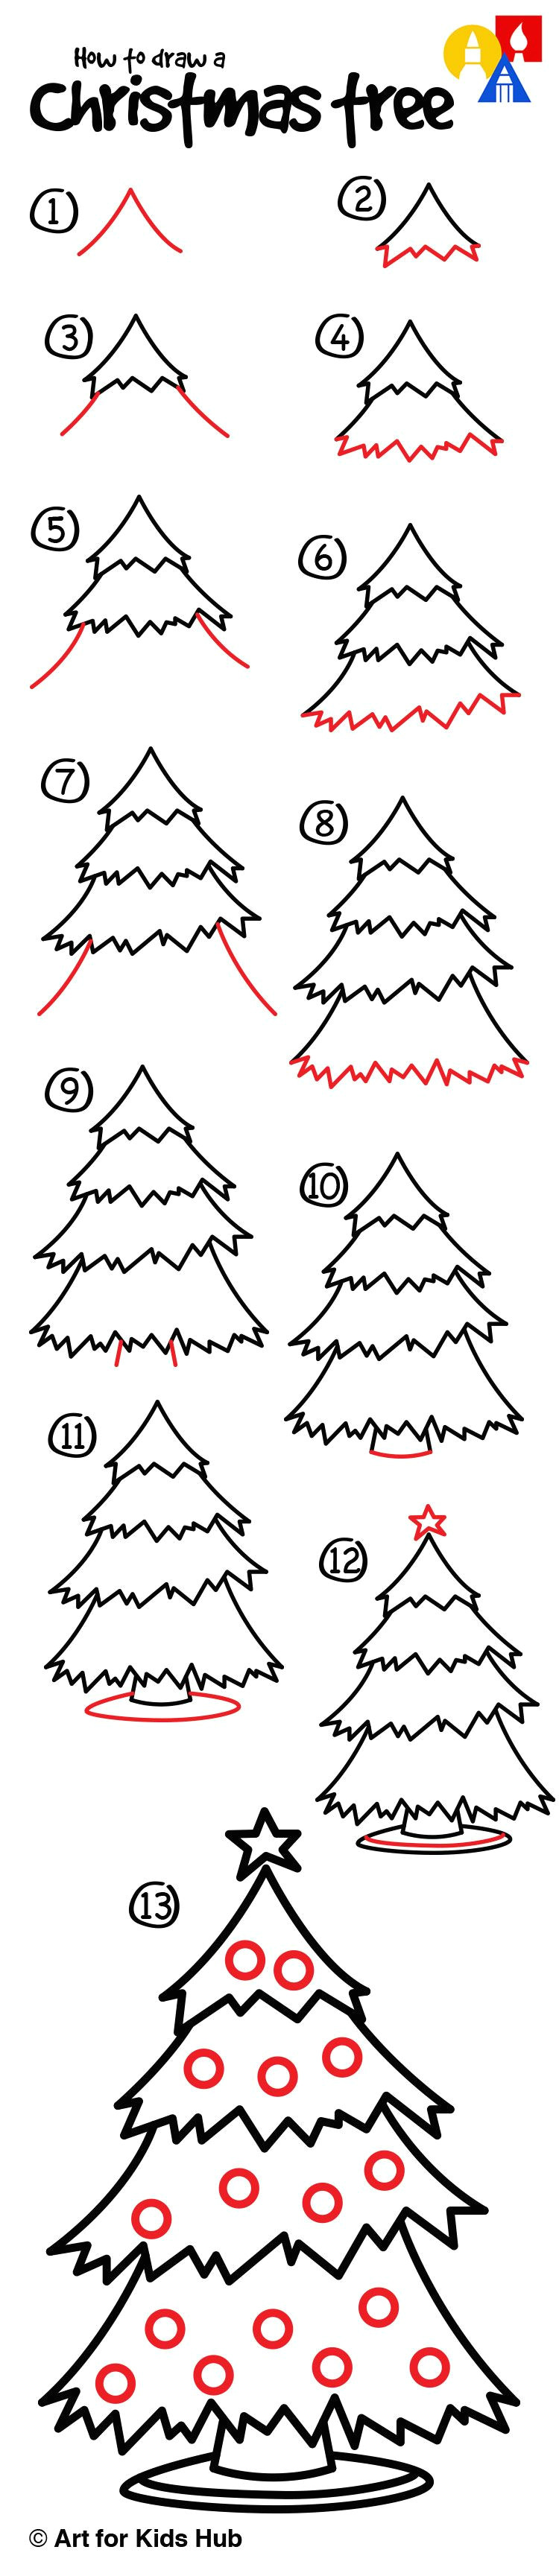 Drawing Xmas Decorations How to Draw A Christmas Tree Art for Kids Hub Christmas Winter